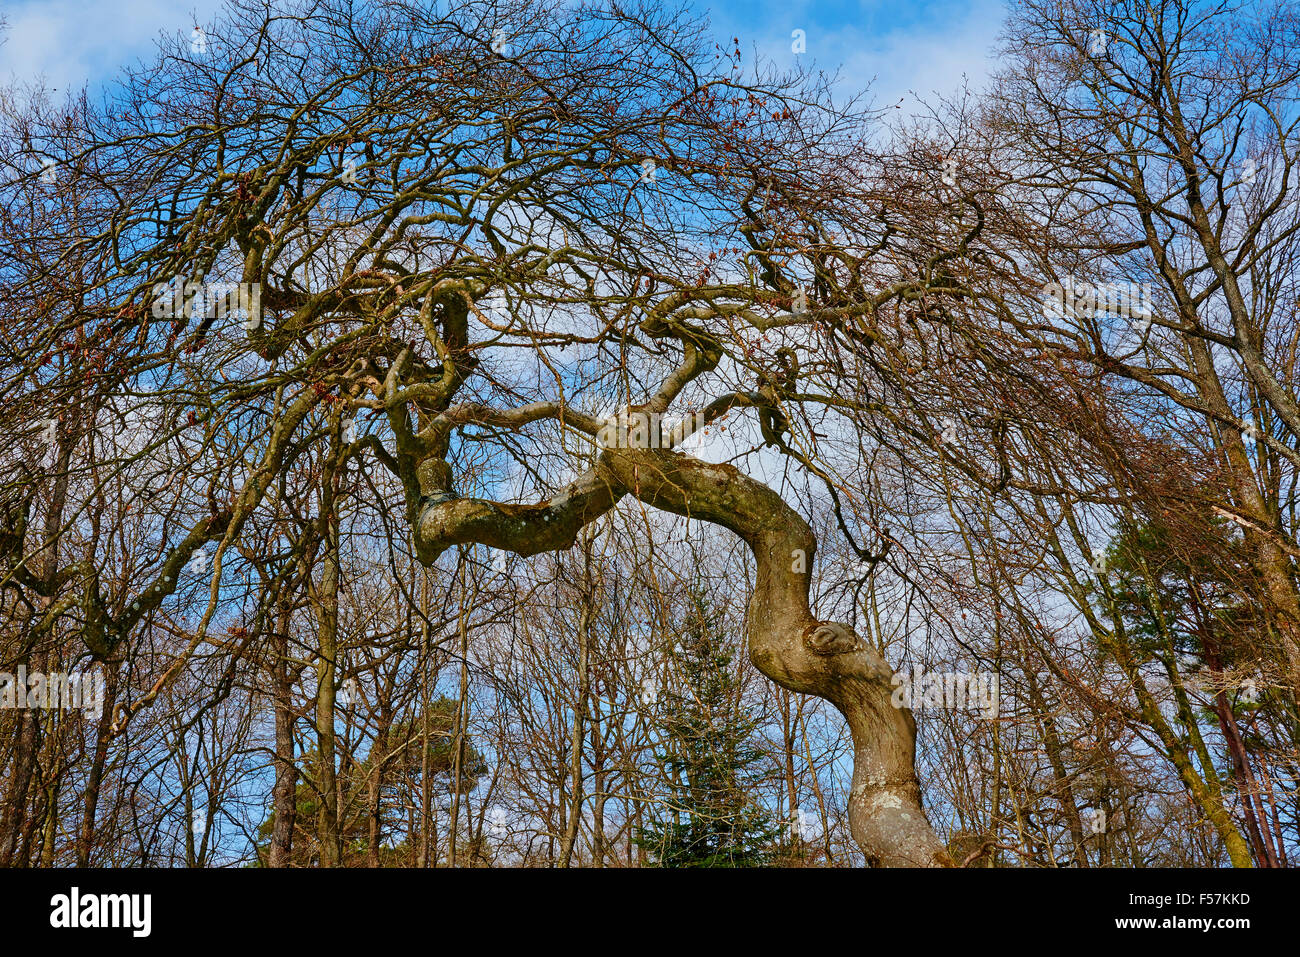 France, Champagne, twisted beech tree at Les Faux de Verzy forest Stock Photo